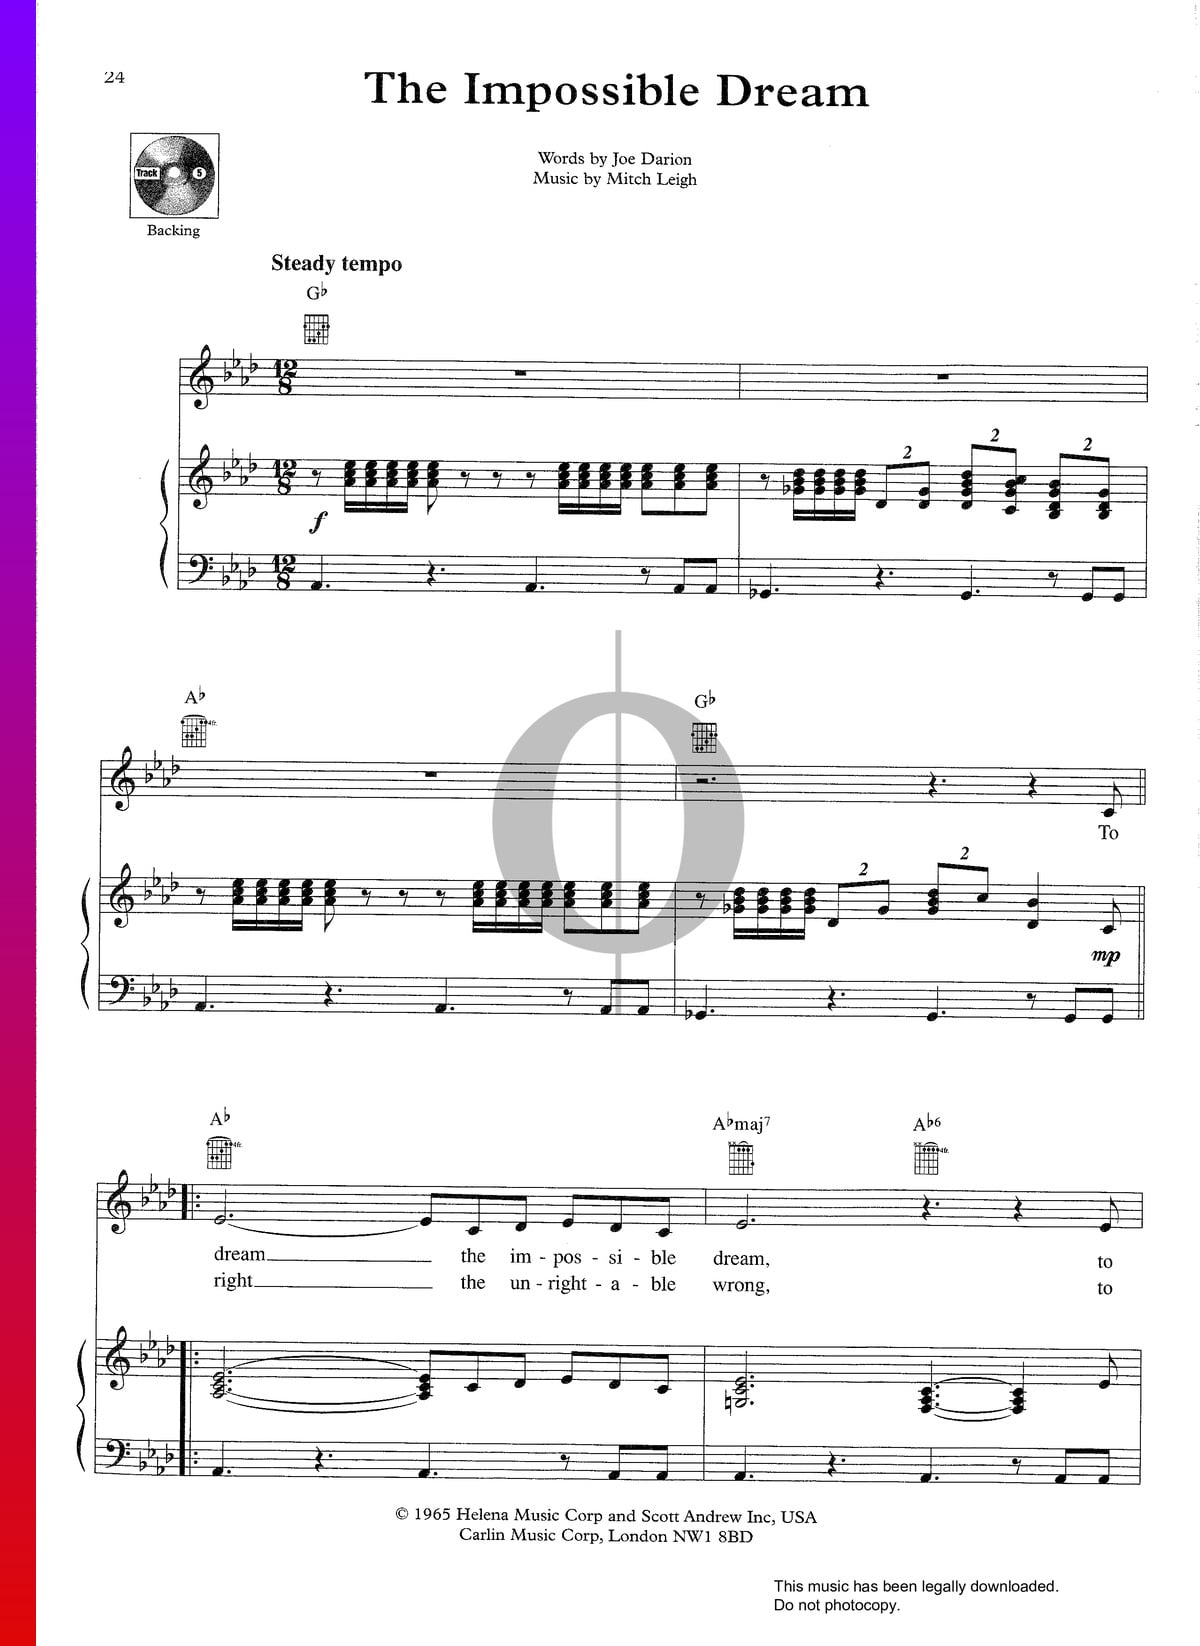 The Impossible Dream Sheet Music Piano Voice Guitar Pdf Download Streaming Oktav